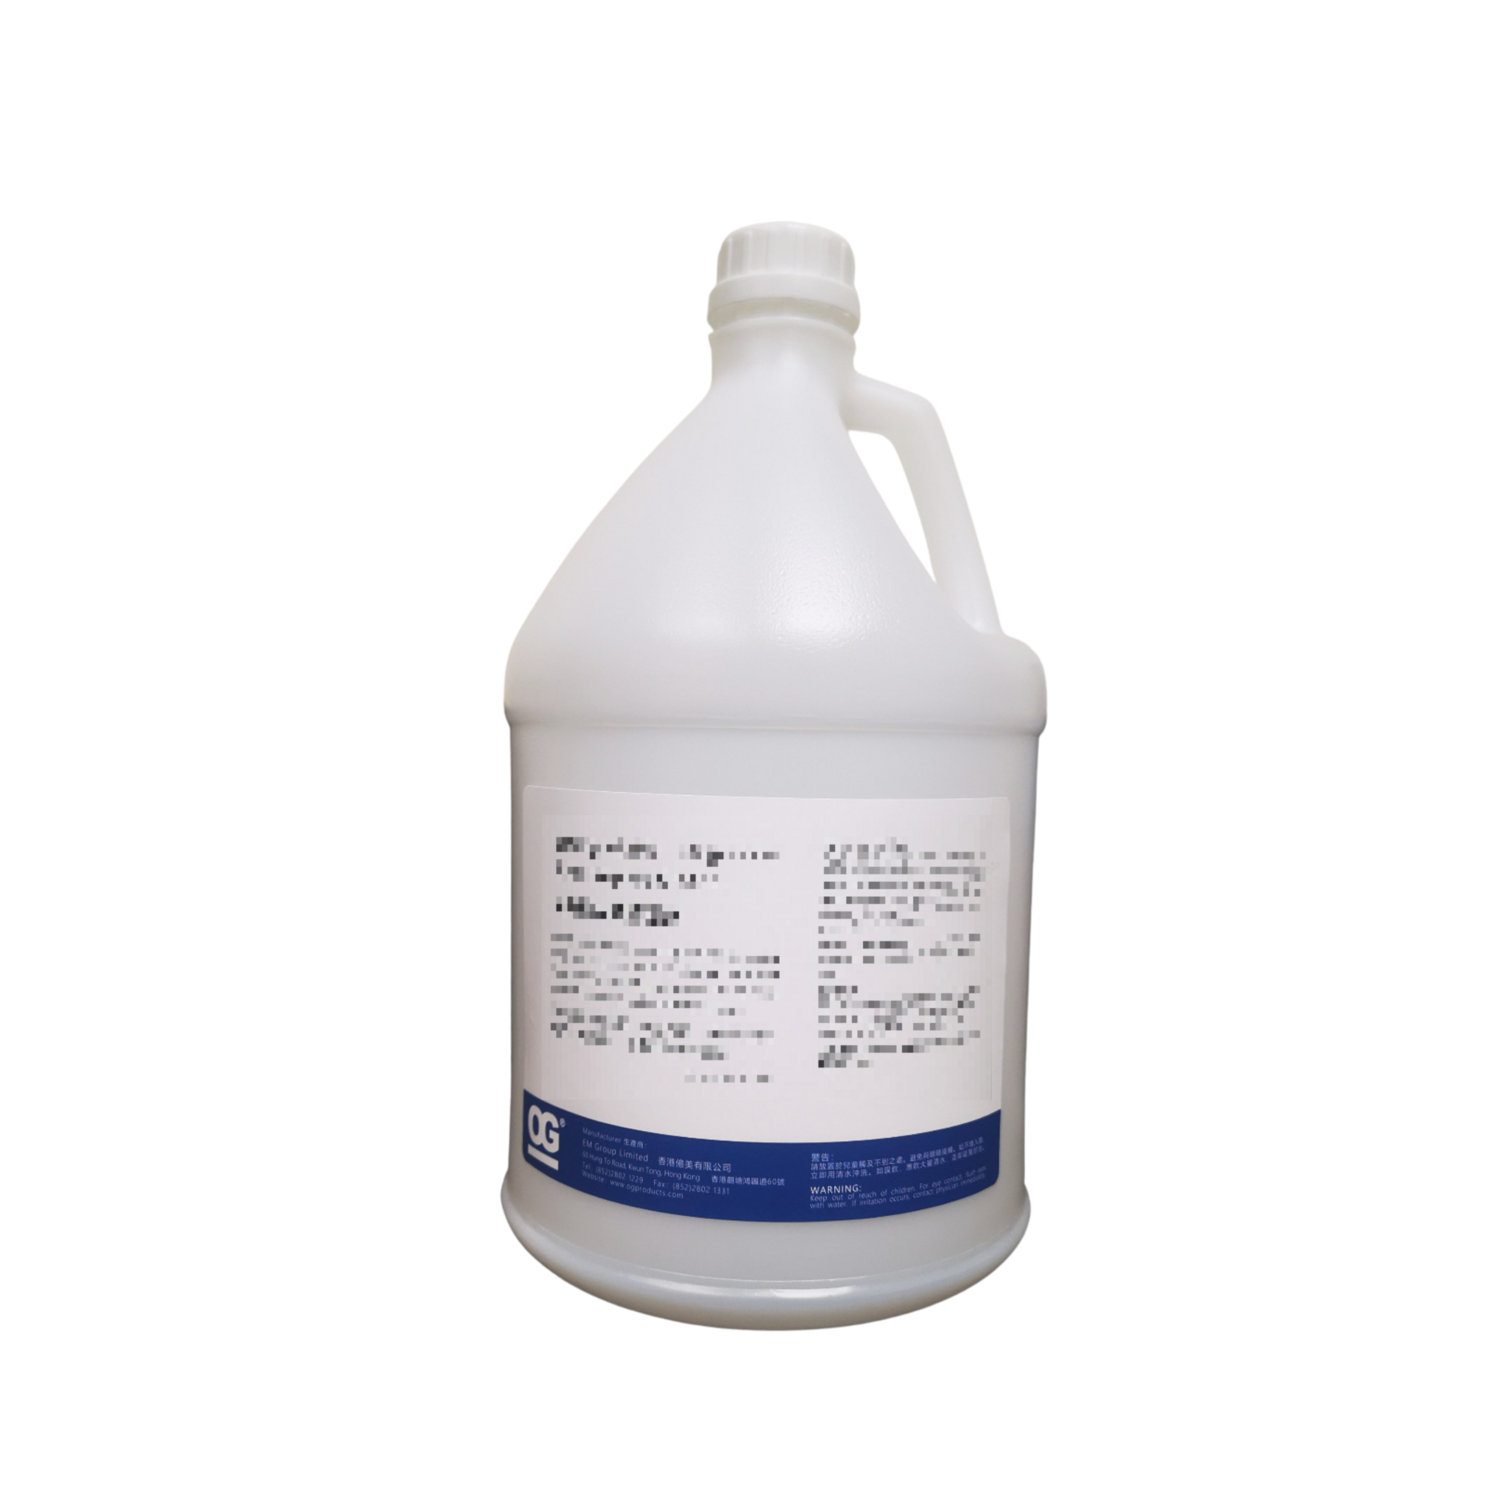 Biodegradable Rust Remover & All Surface Cleaner - 1Gal